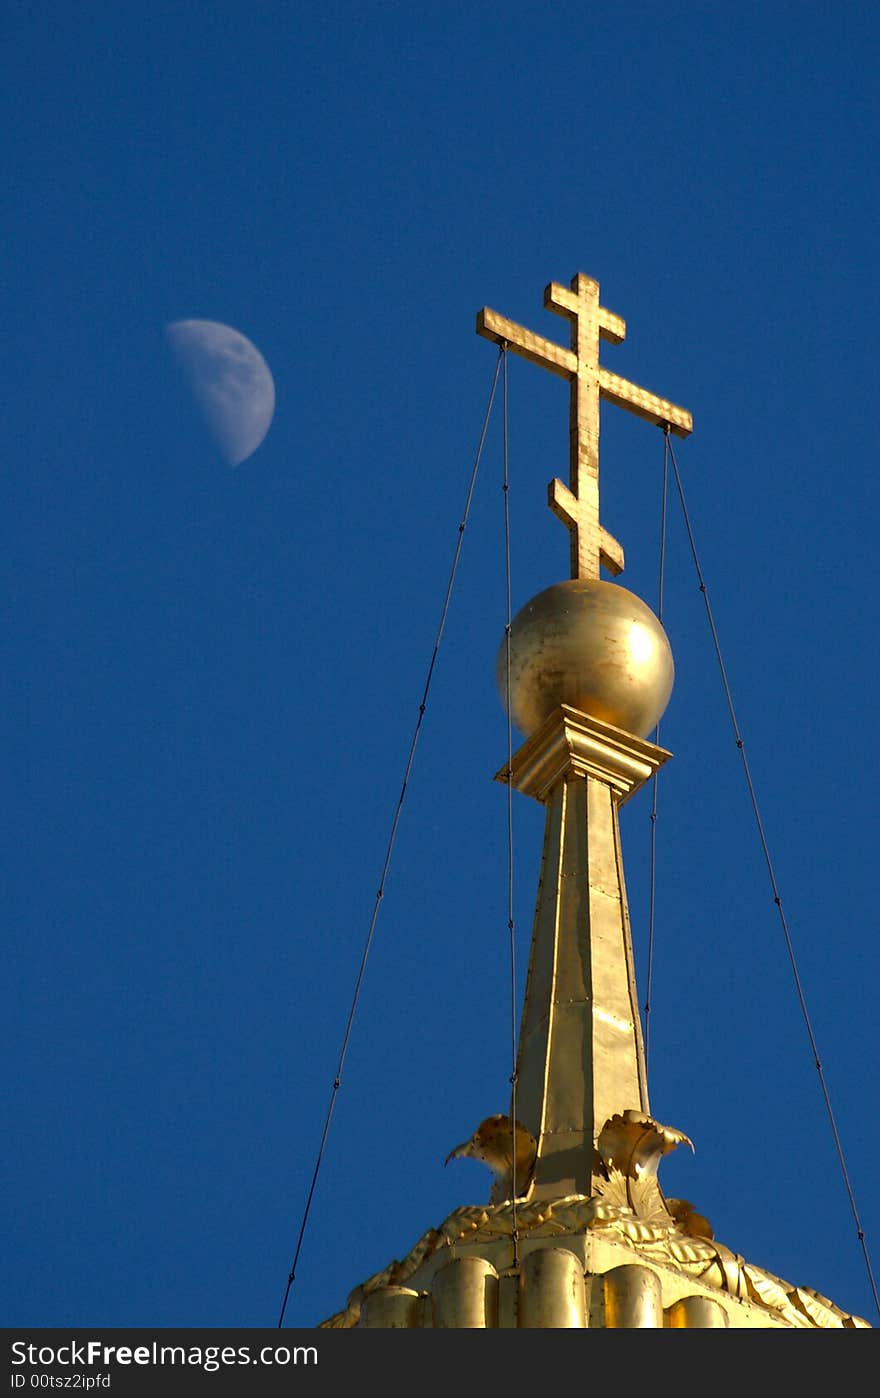 Golden orthodox cross on blue sky with moon. Golden orthodox cross on blue sky with moon.